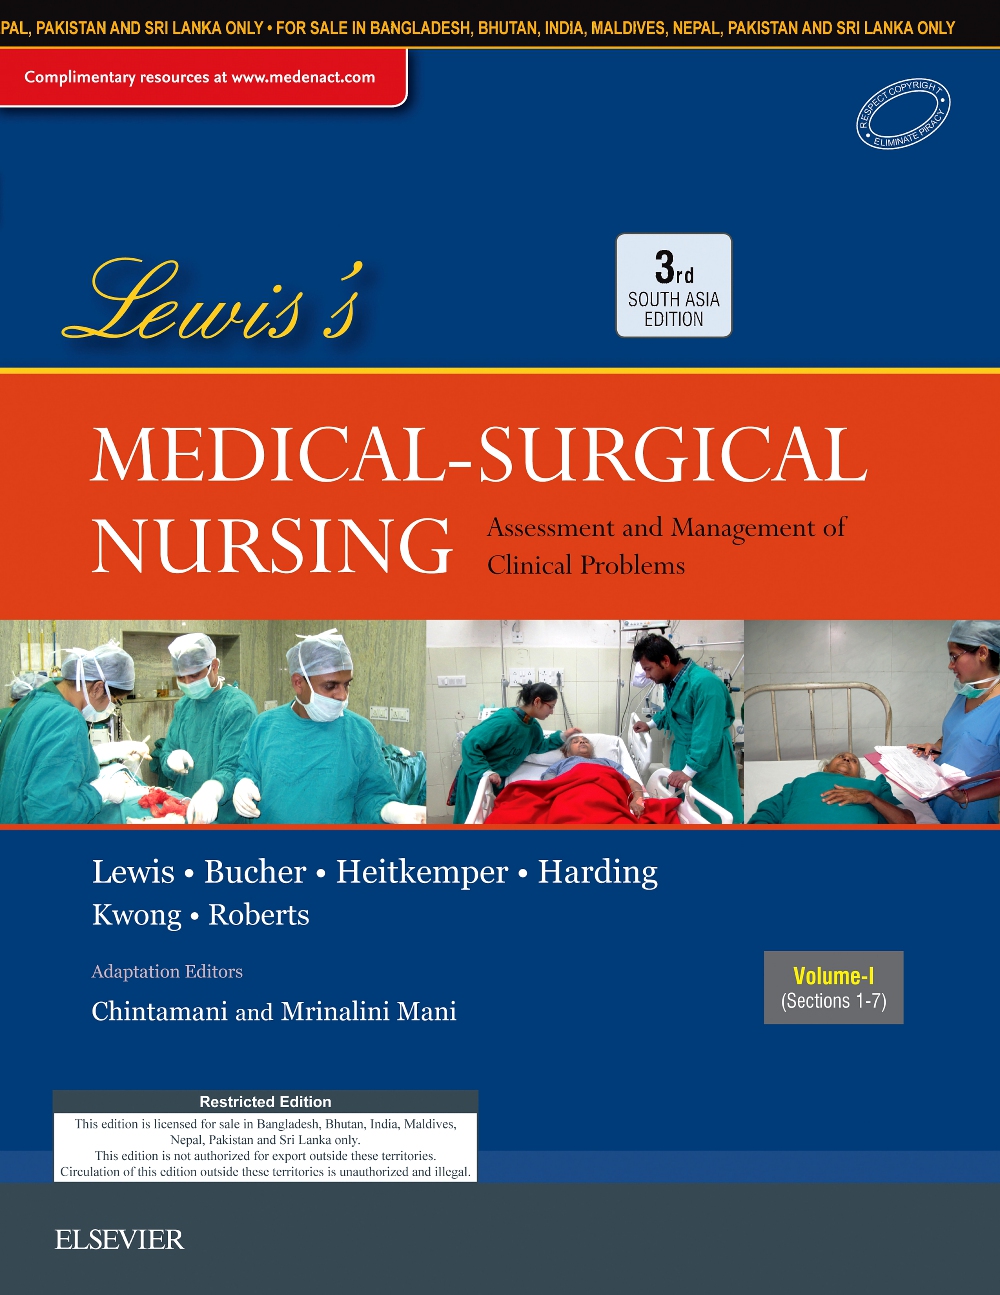 Lewis'S Medical-Surgical Nursing, Third South Asia Edition: Assessment And Management Of Clinical Problems By Chintamani And Mrinalini Mani | 21 August 2018 (Old Edition))